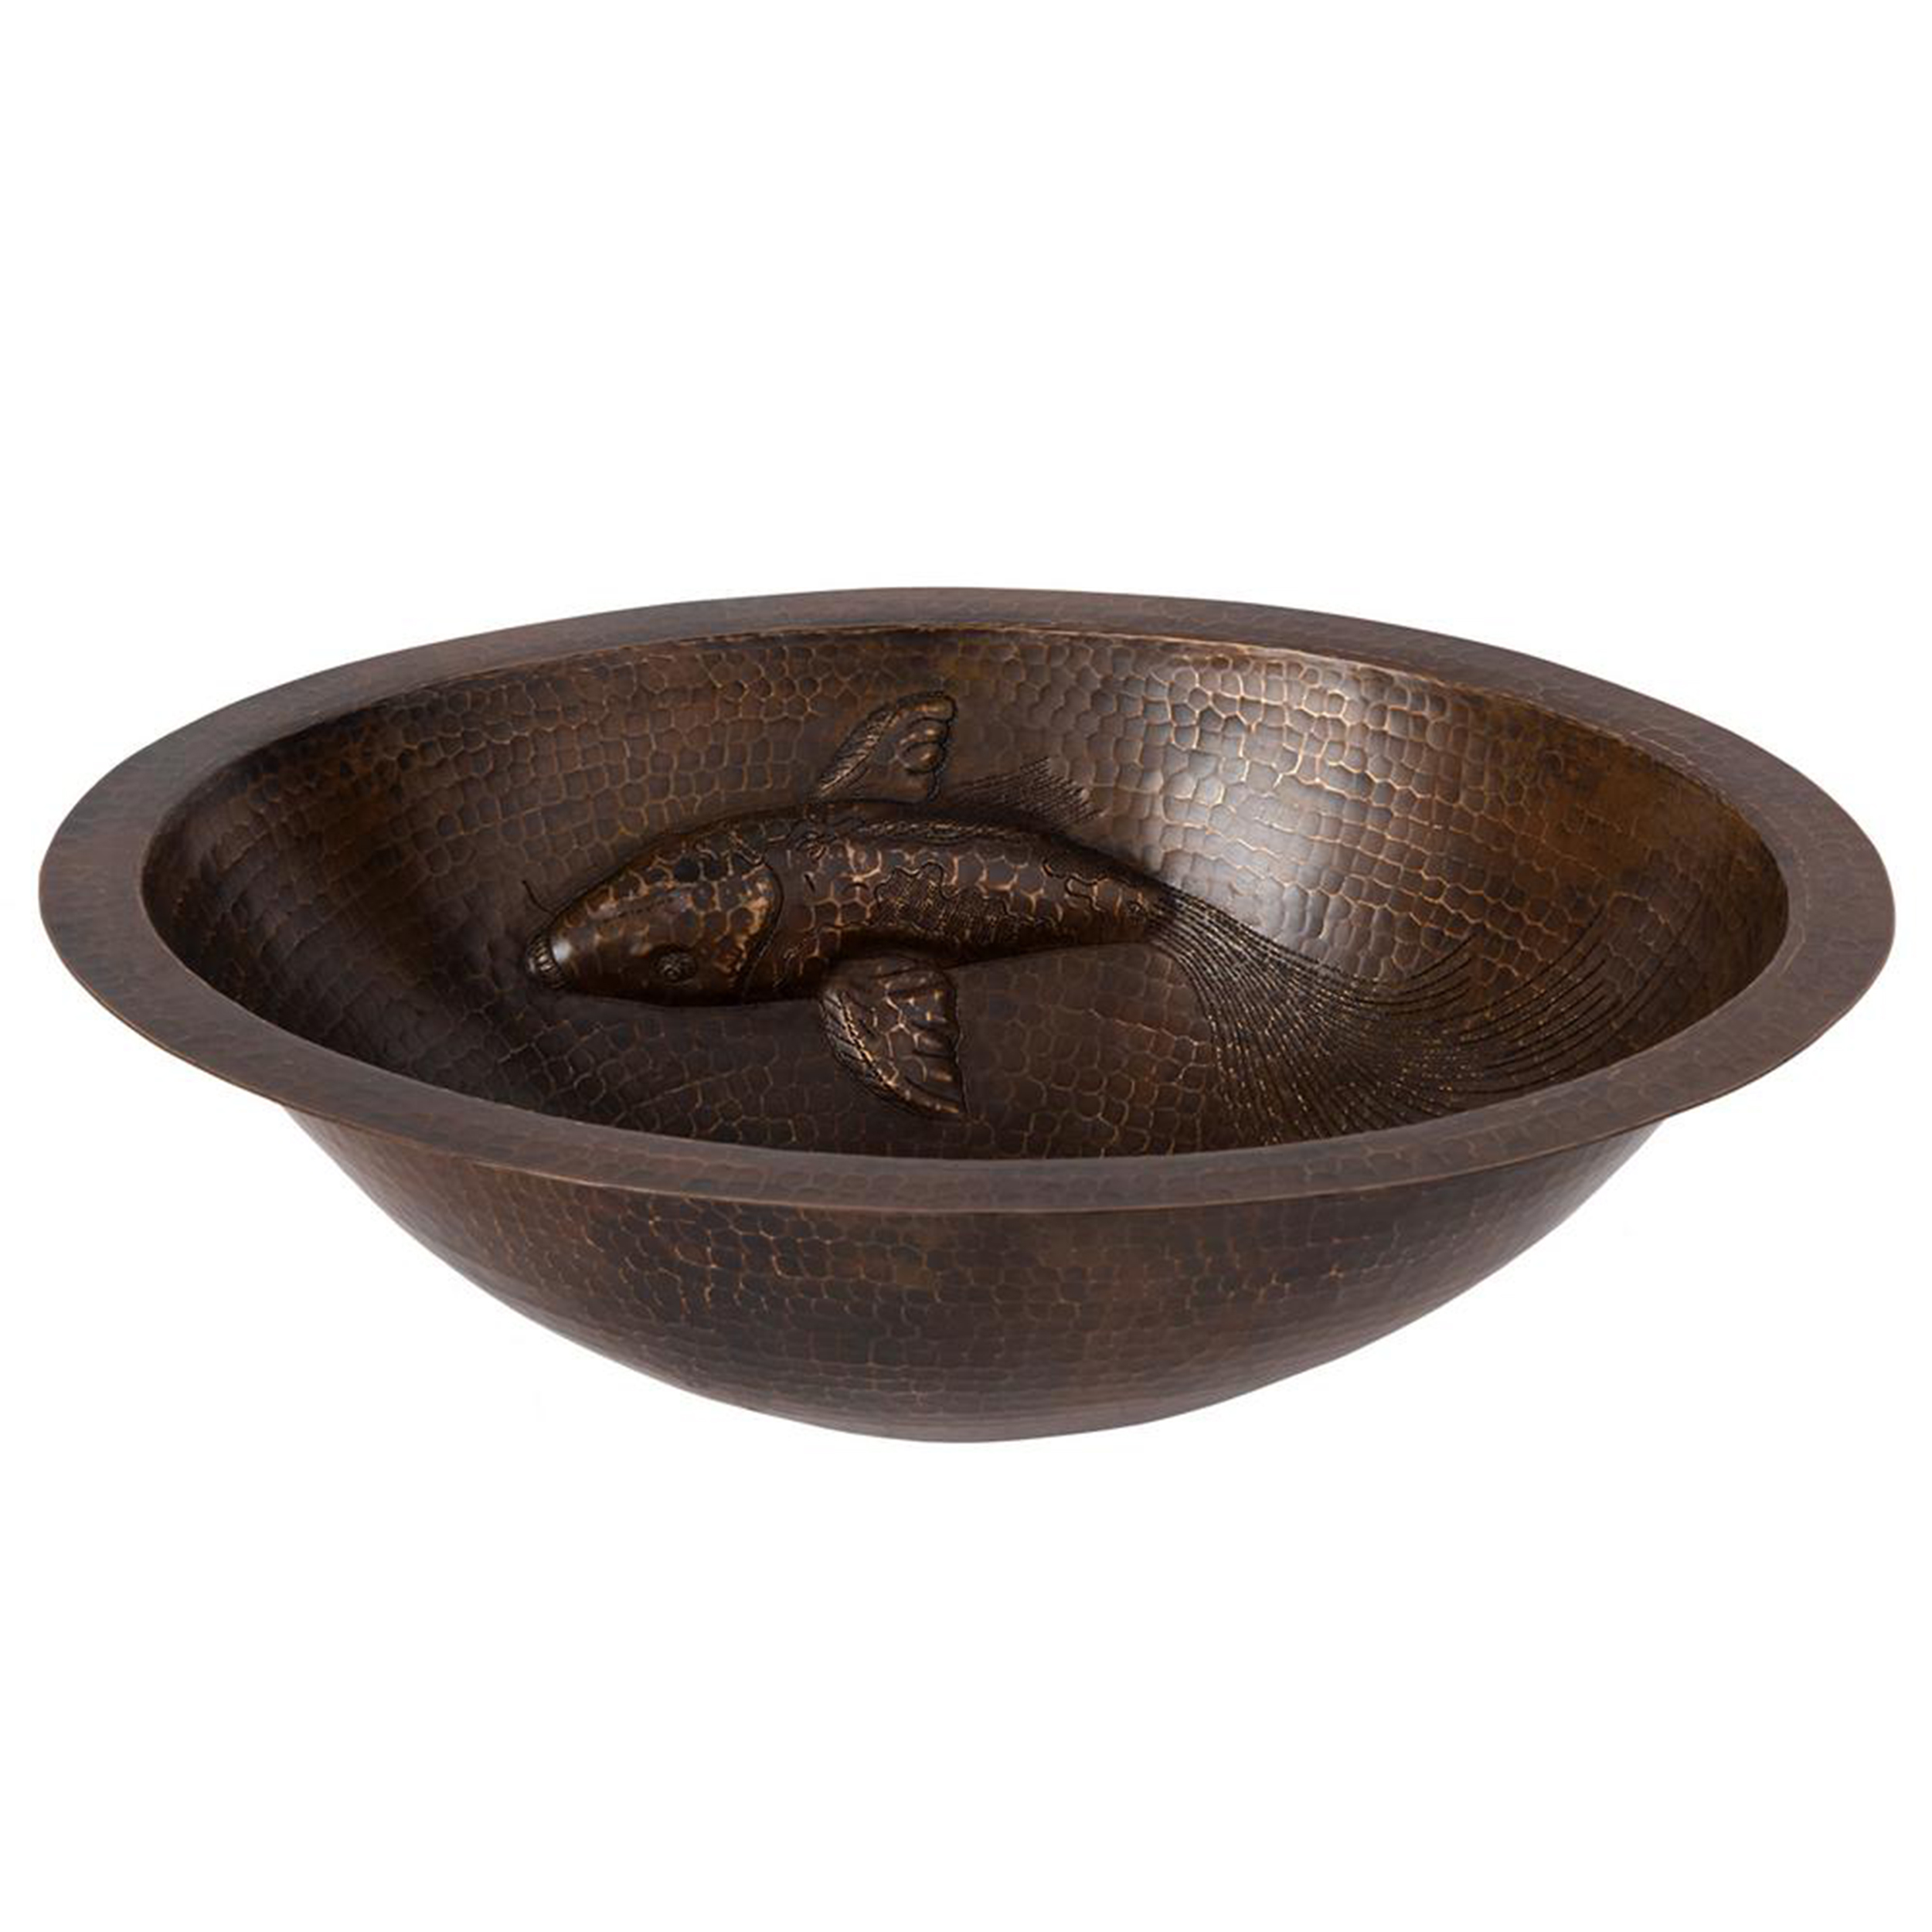 Oval Under Counter Hammered Copper Bathroom Sink With One Large Koi Fish Design